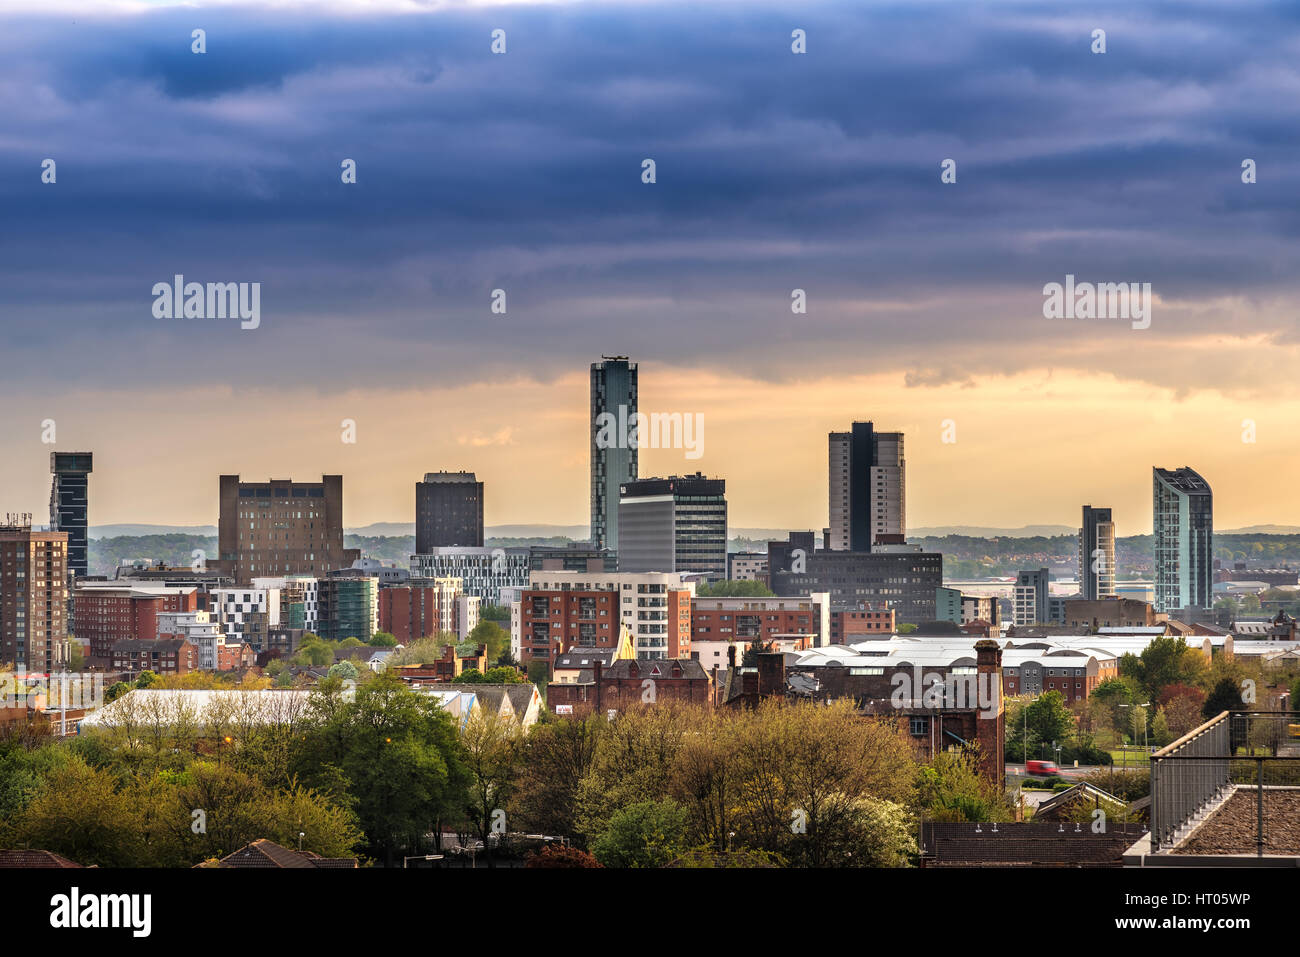 The Famous Liverpool Skyline under the dark clouds. Stock Photo